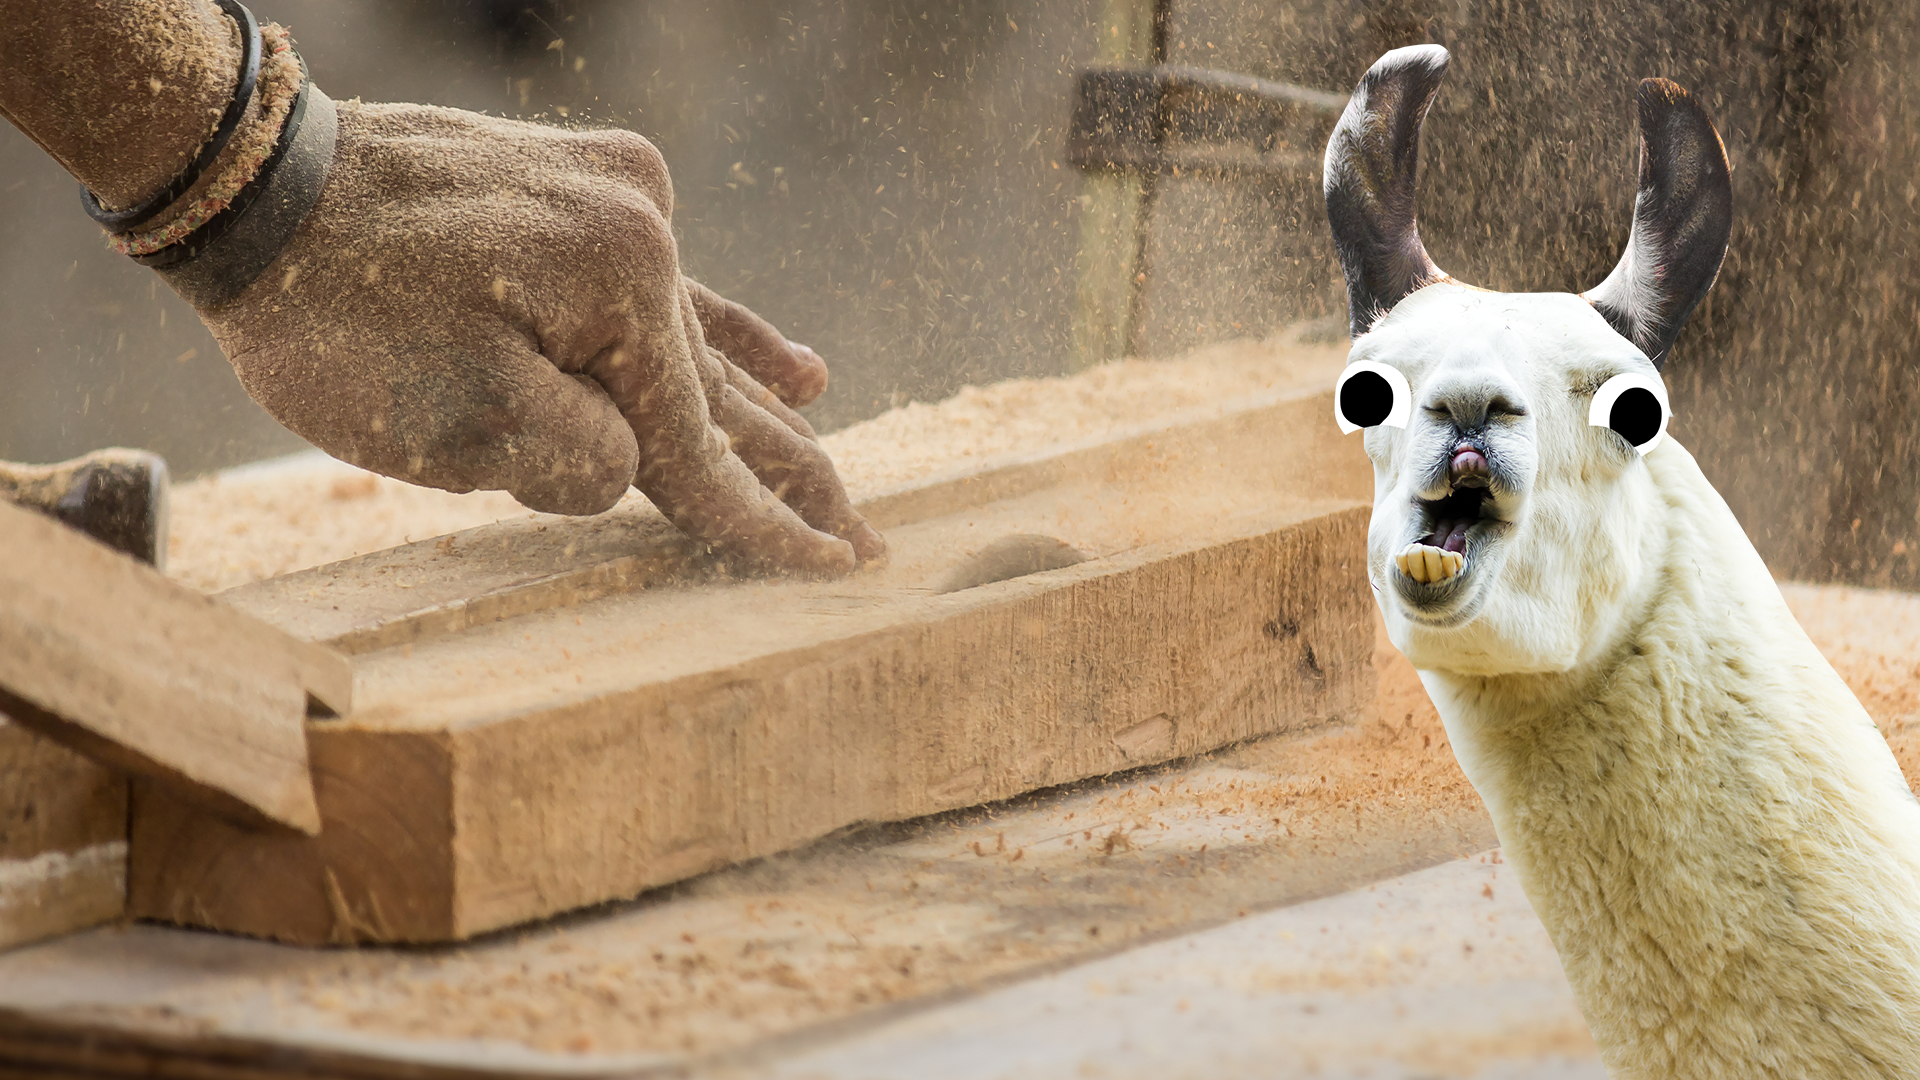 Someone doing carpentry and derpy llama